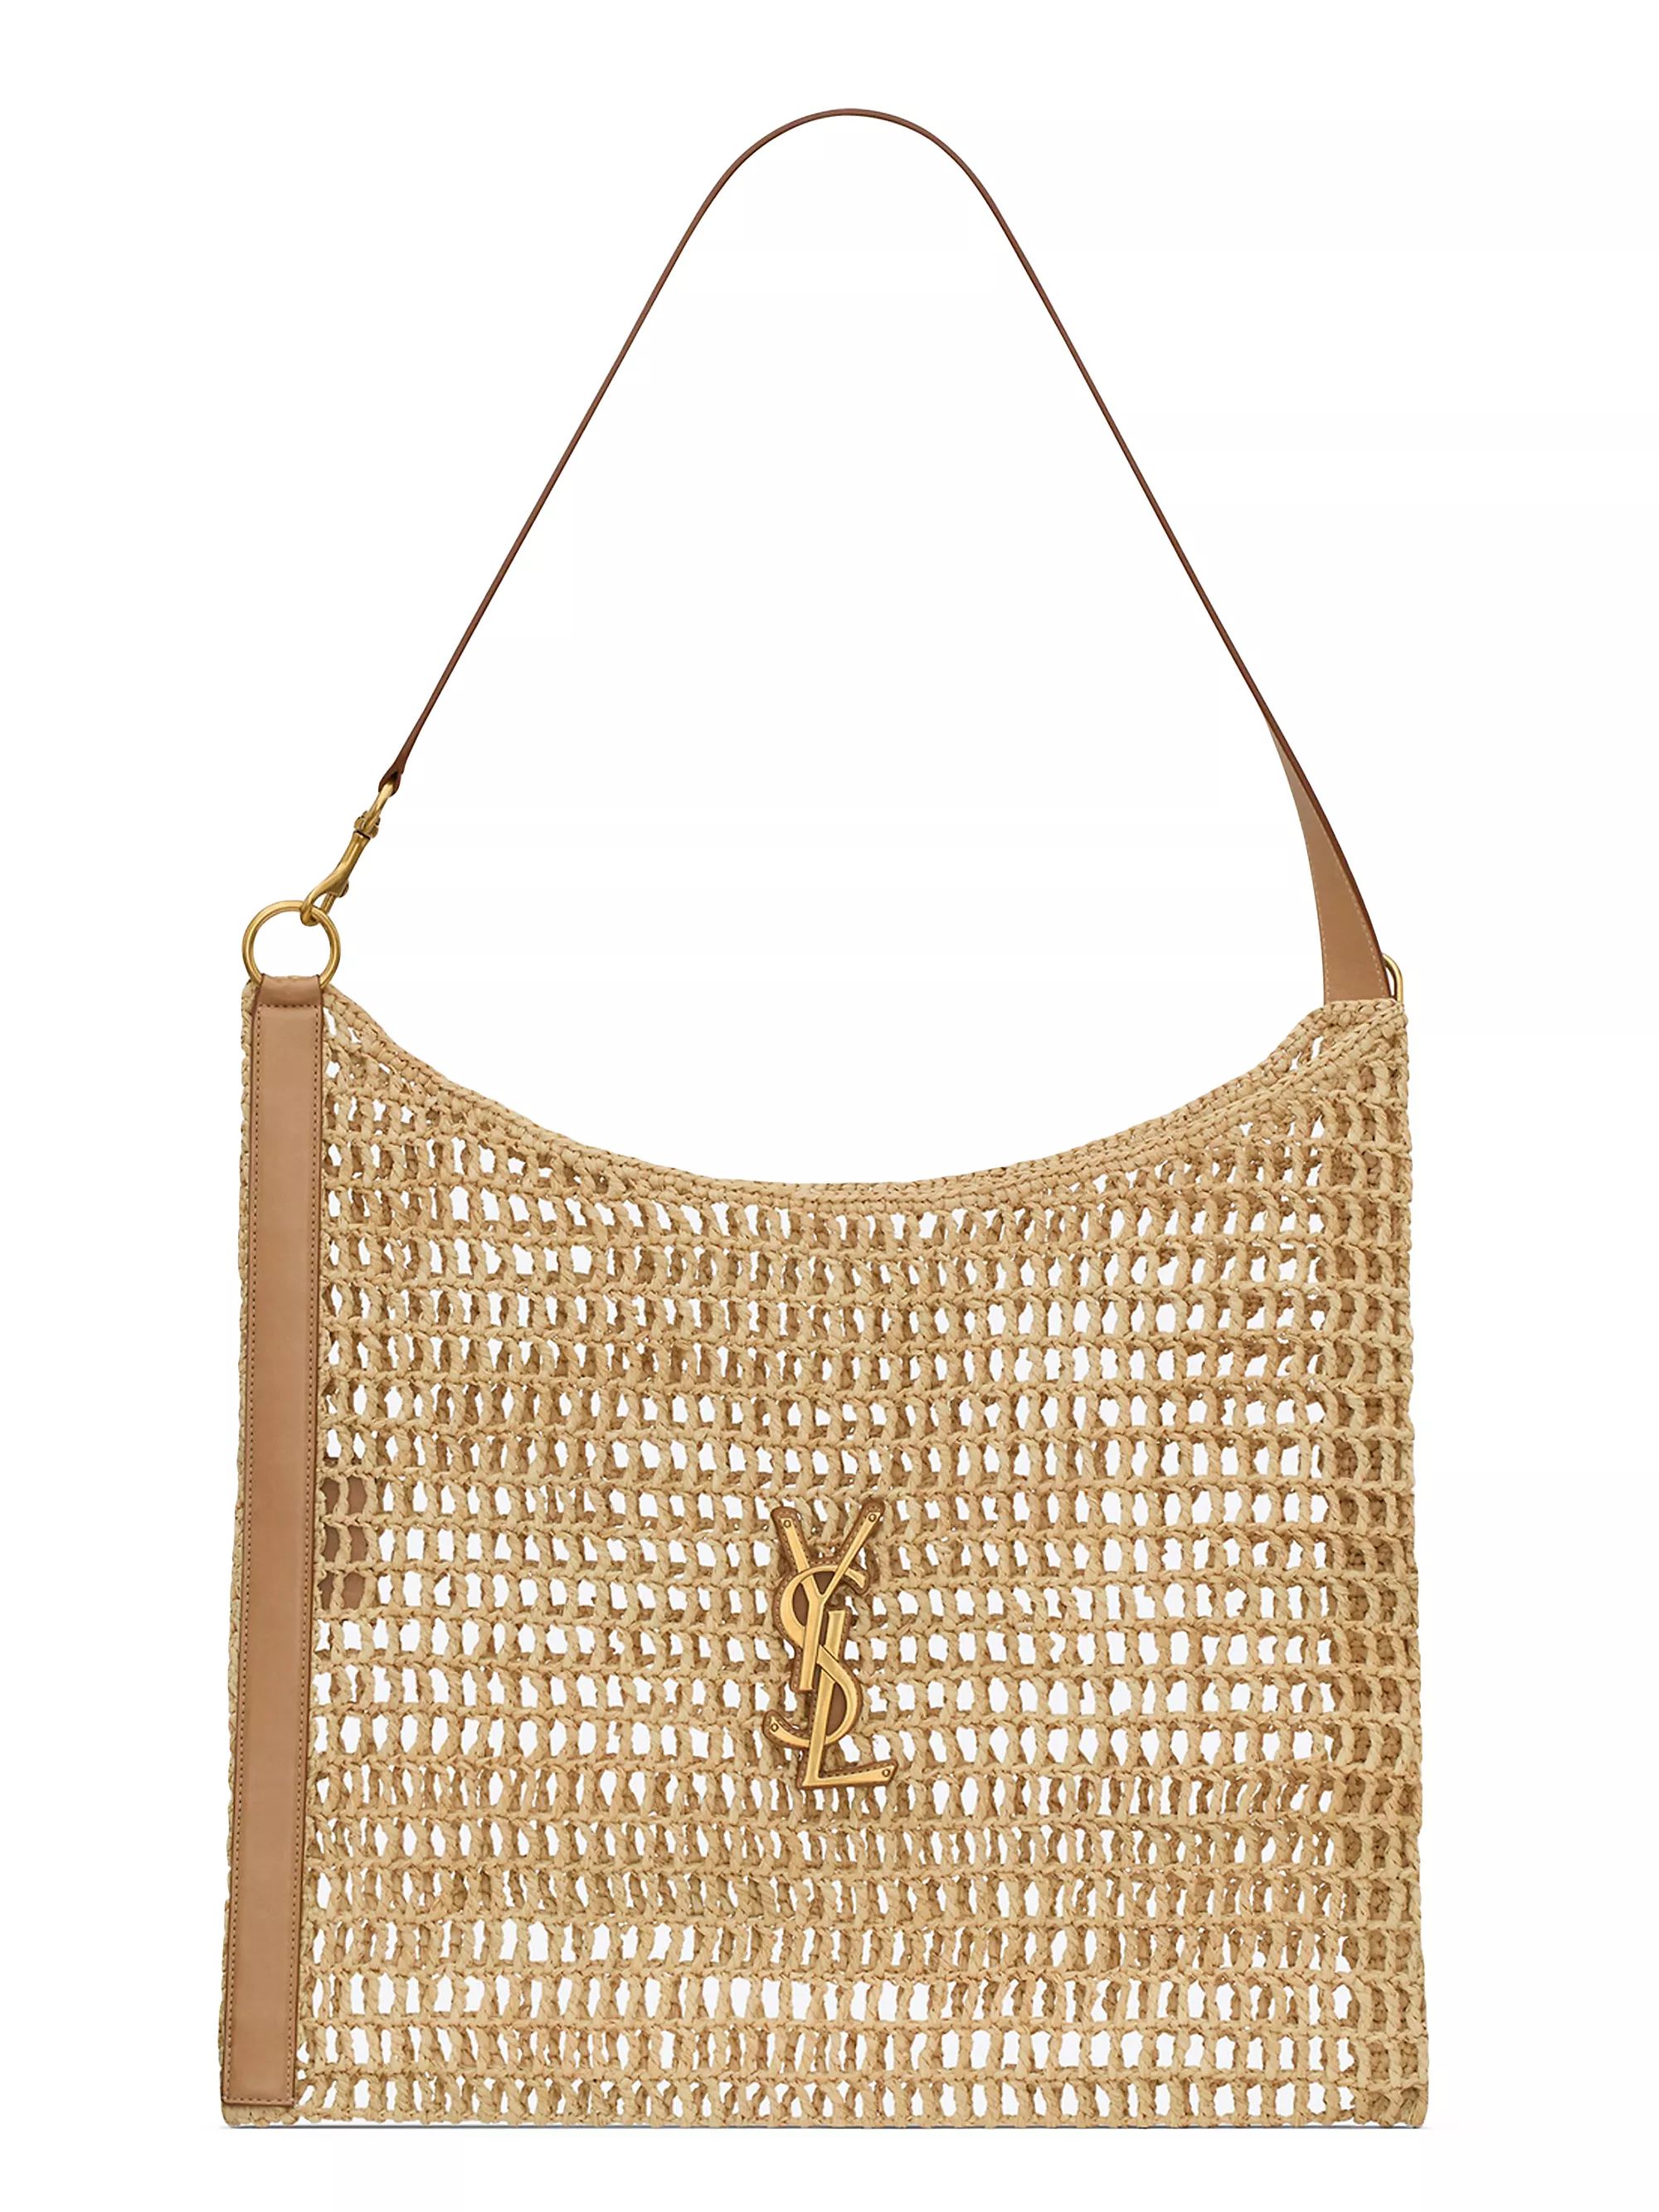 Oxalis in Raffia Crochet and Vegetable-Tanned Leather | Saks Fifth Avenue